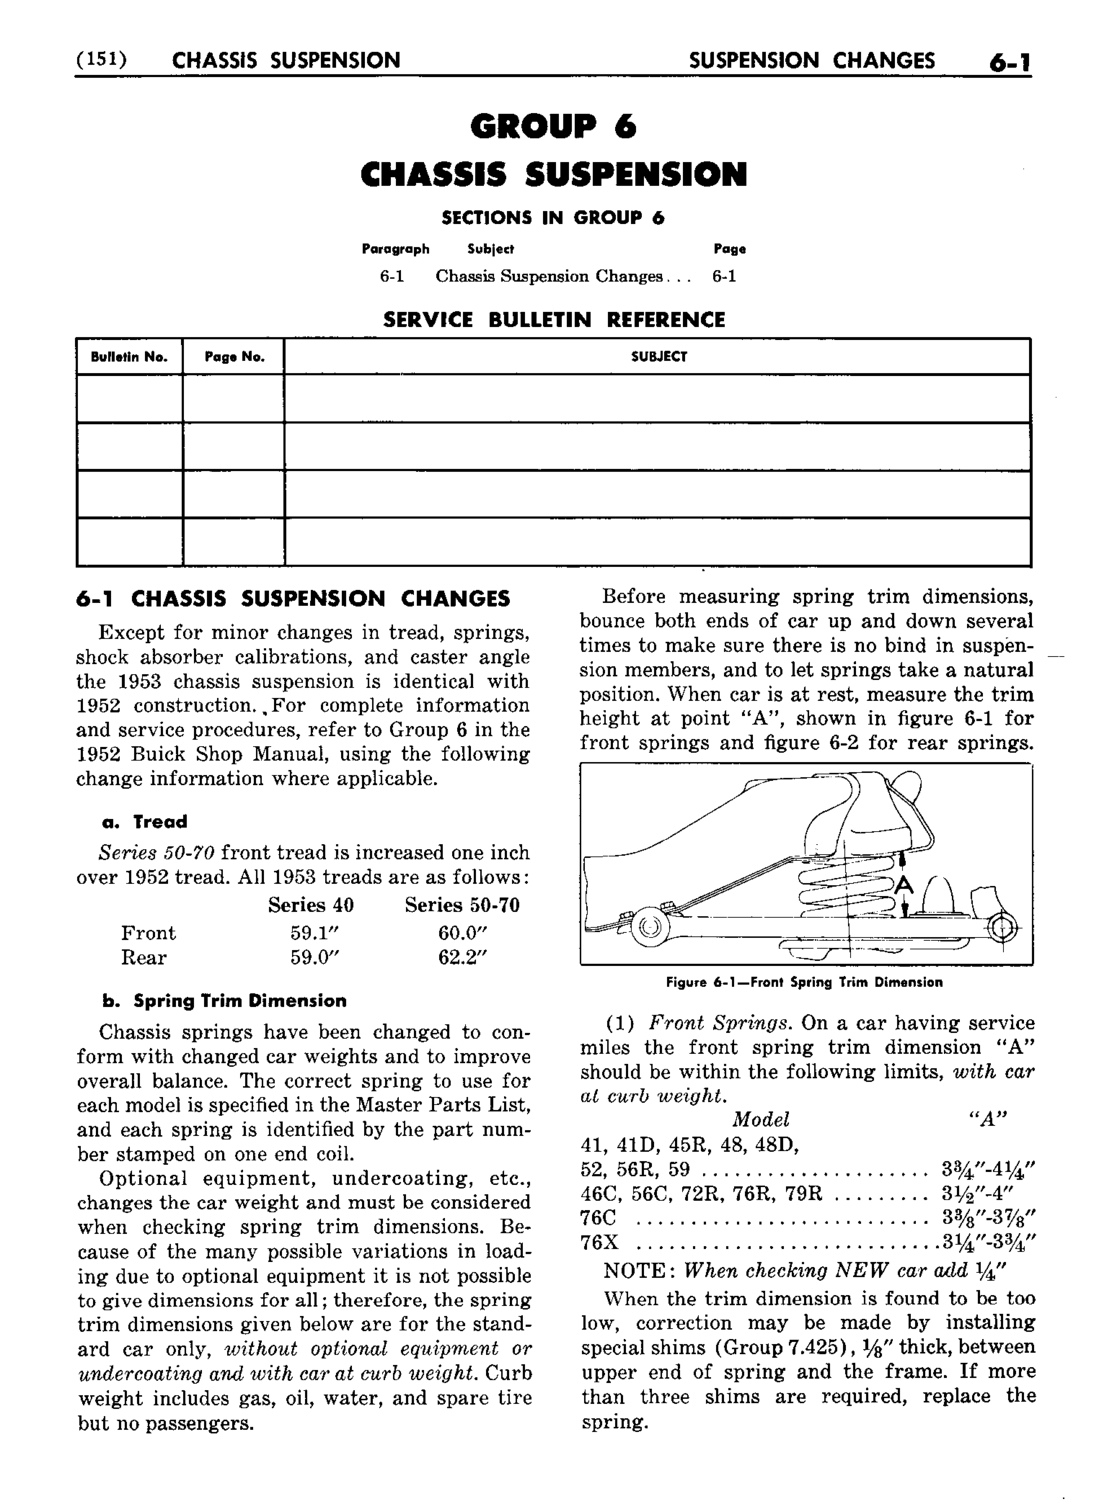 n_07 1953 Buick Shop Manual - Chassis Suspension-001-001.jpg